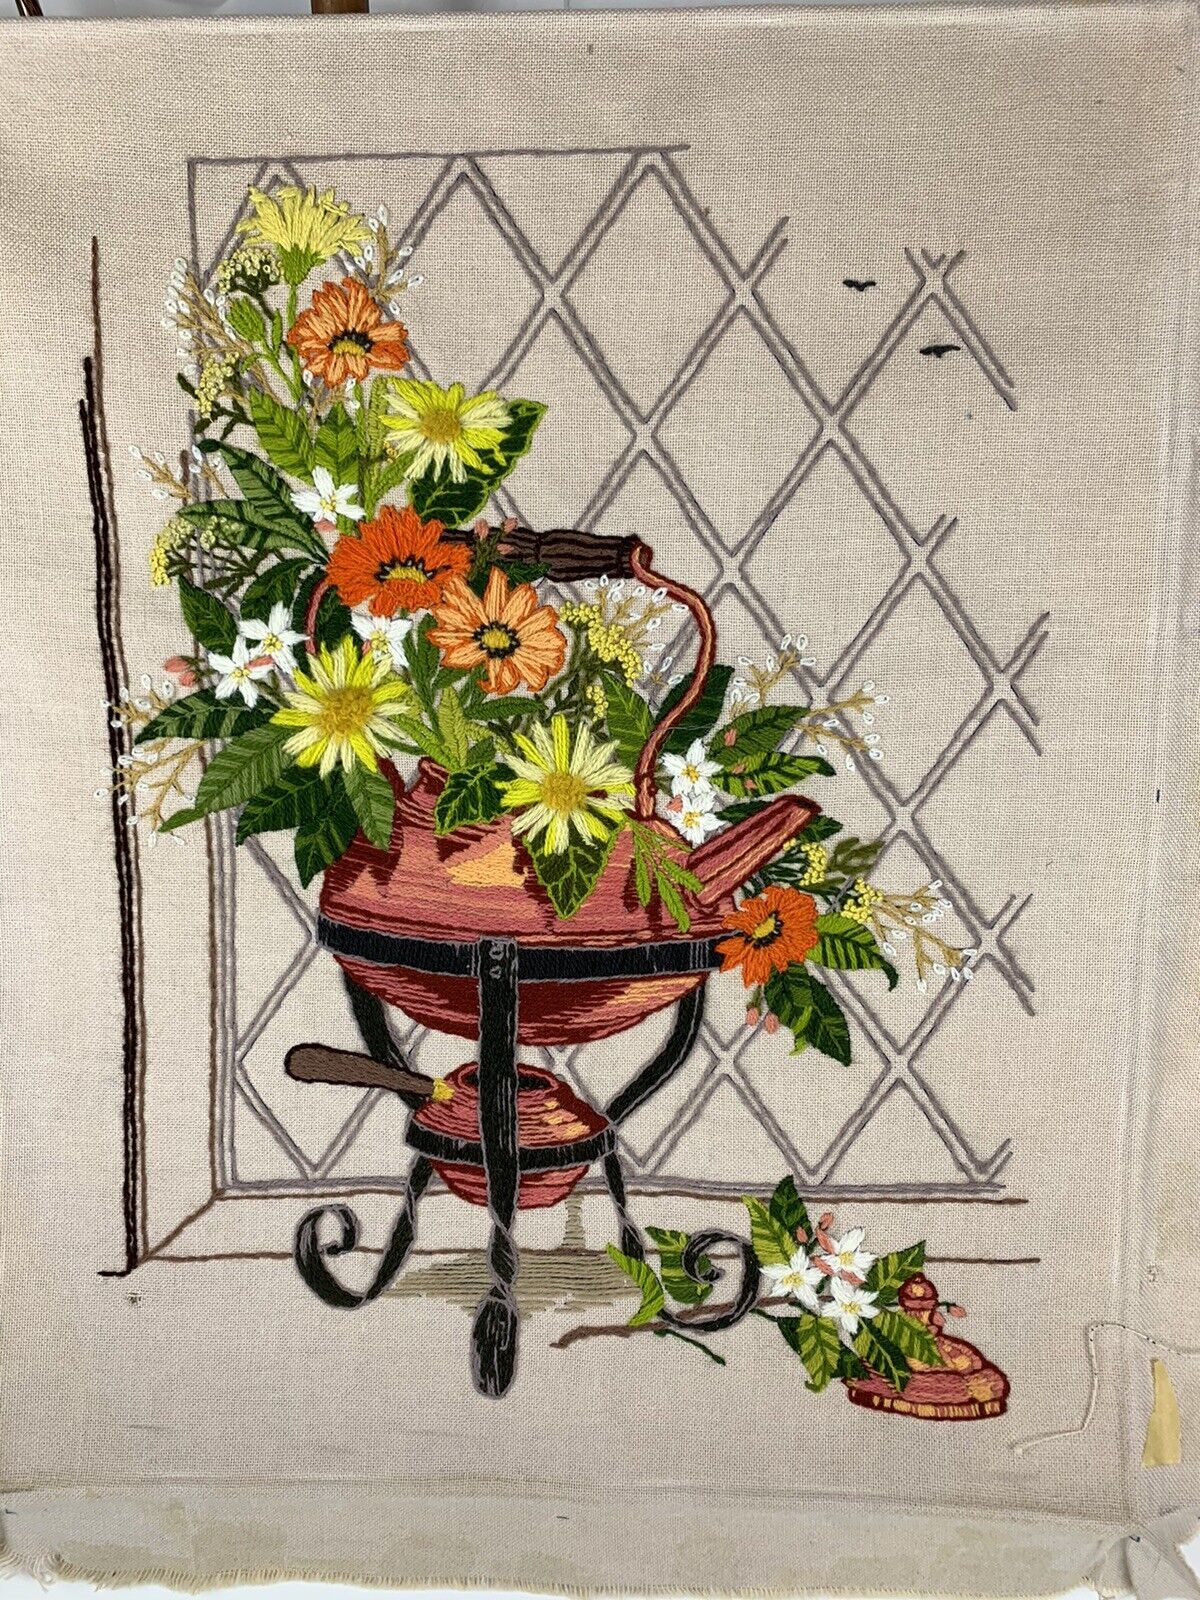 Paragon Crewel # 0414 Copper Kettle Floral 18" X 24" Unopened 1976 George Ball